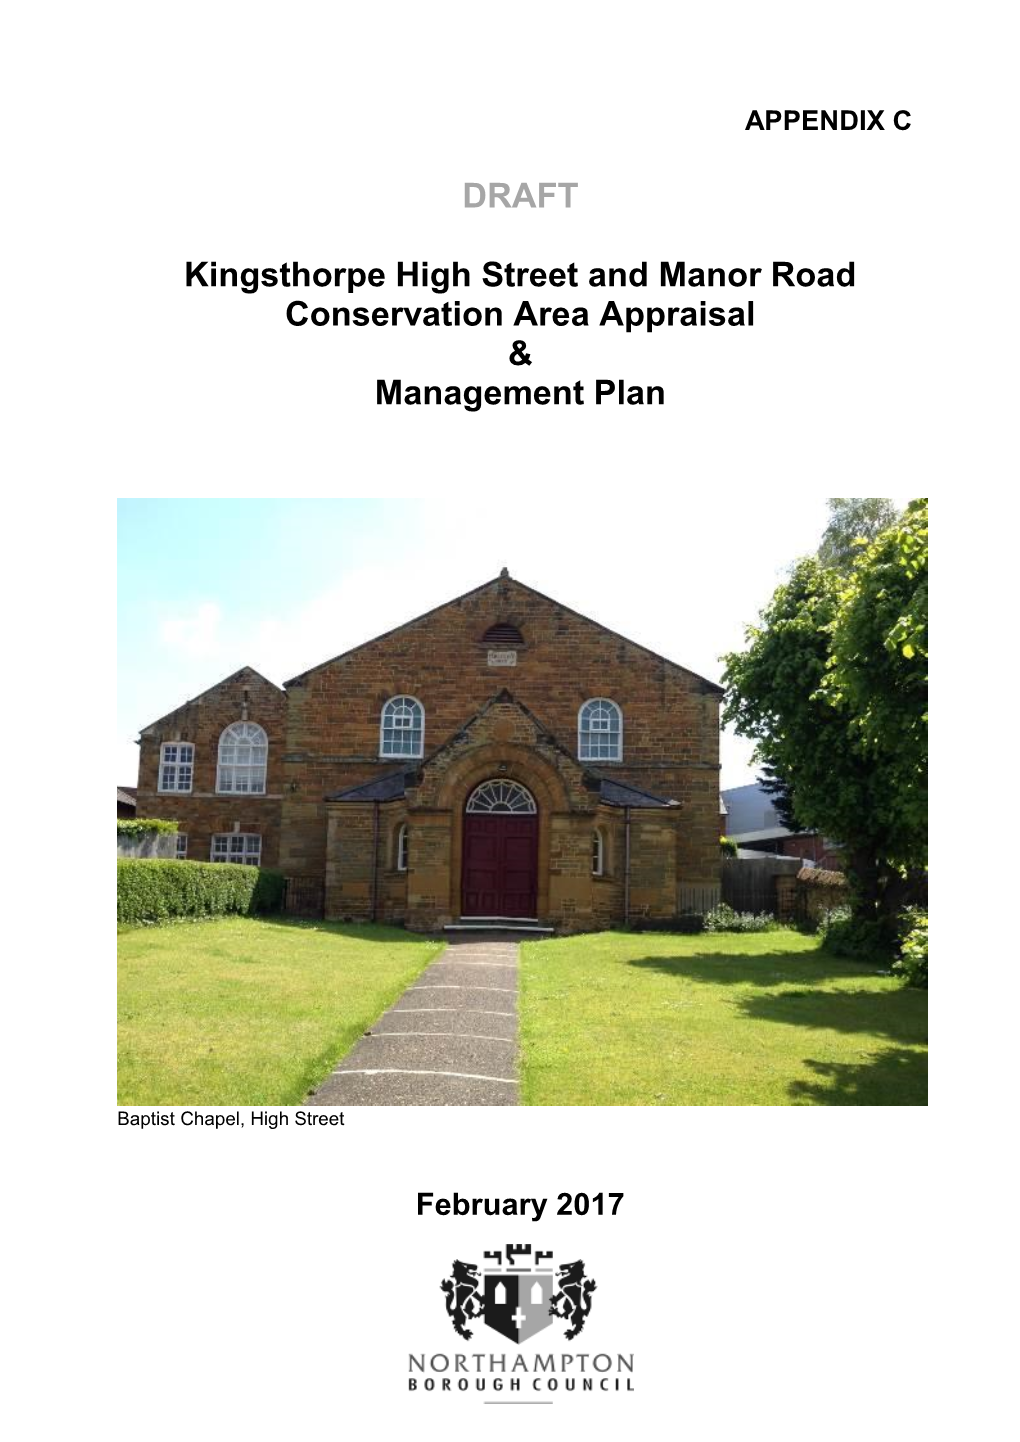 Kingsthorpe High Street and Manor Road Conservation Area Appraisal & Management Plan